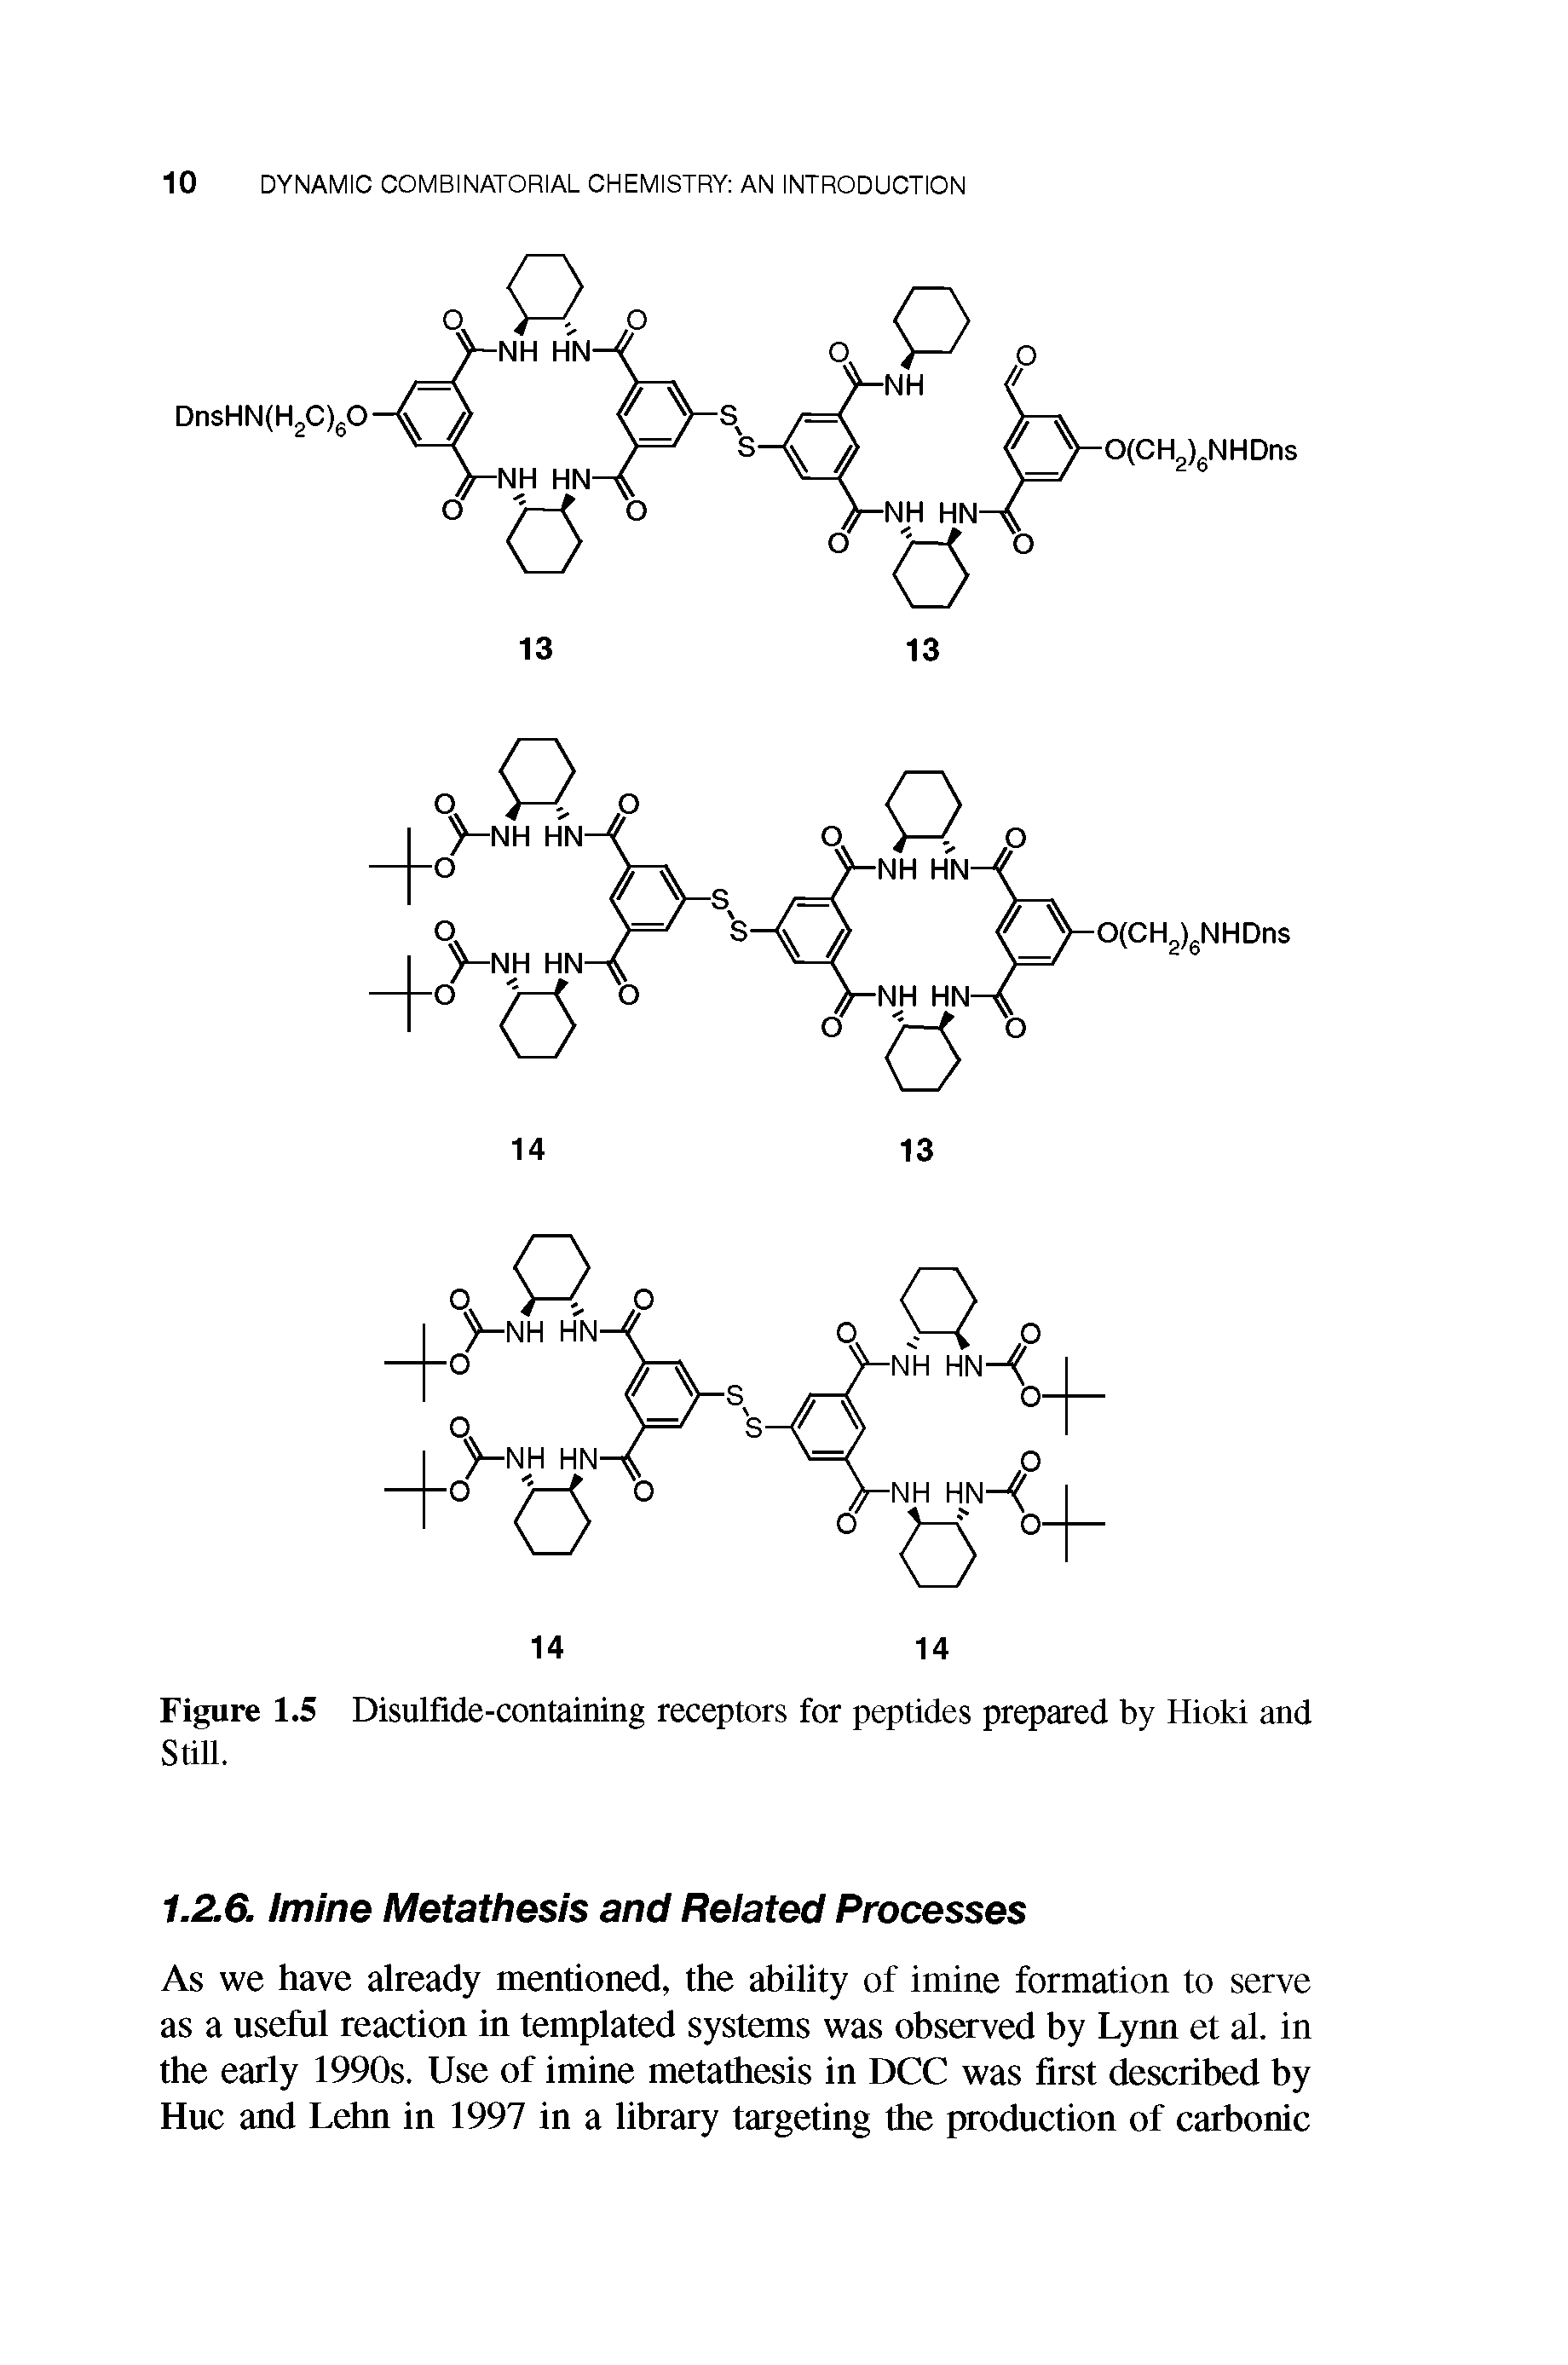 Figure 1.5 Disulfide-containing receptors for peptides prepared by Hioki and Still.